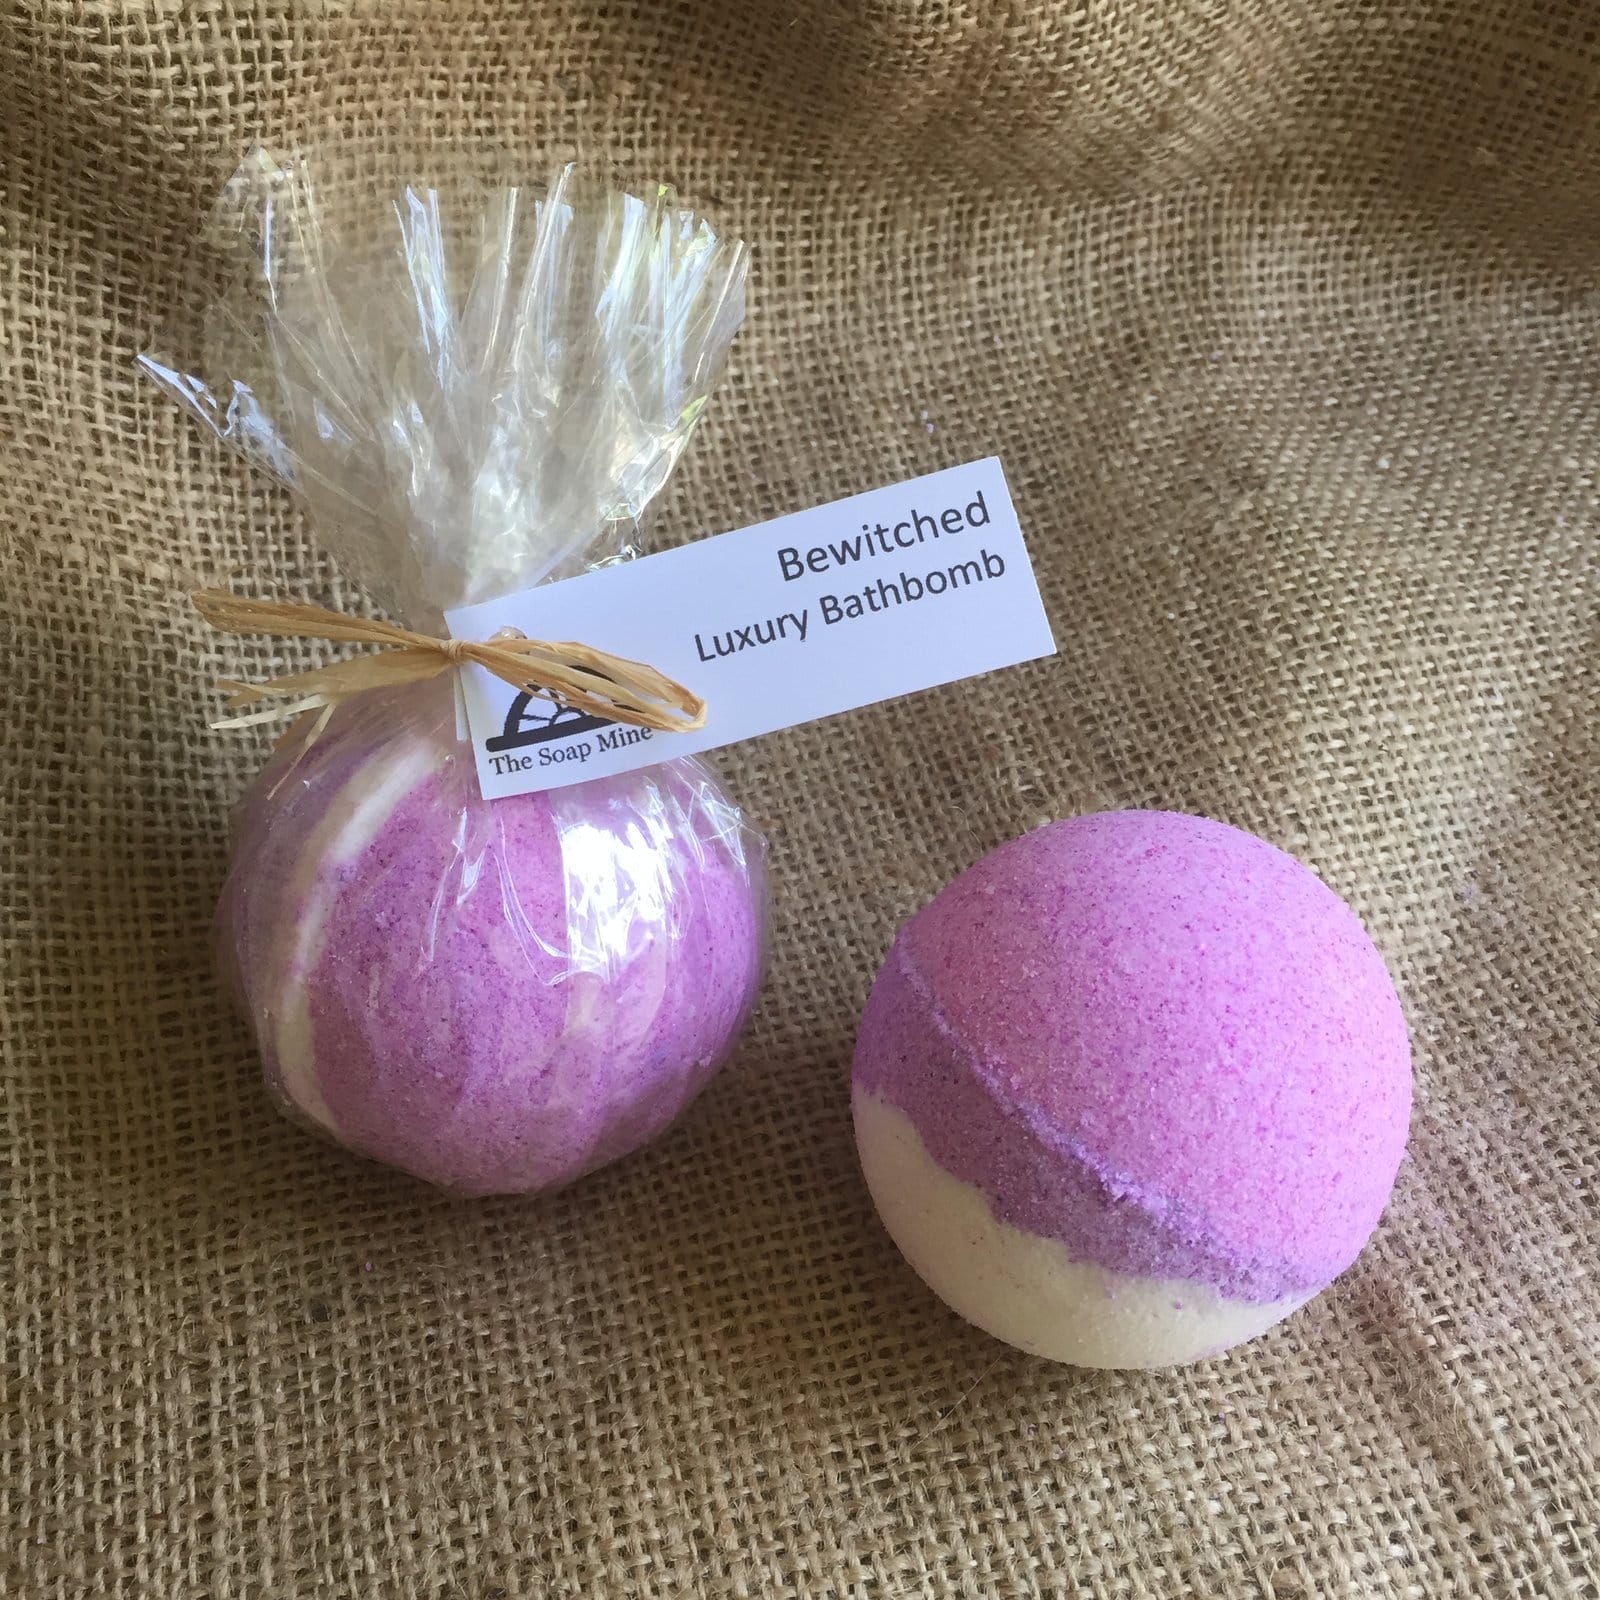 Bewitched Luxury Bath Bomb